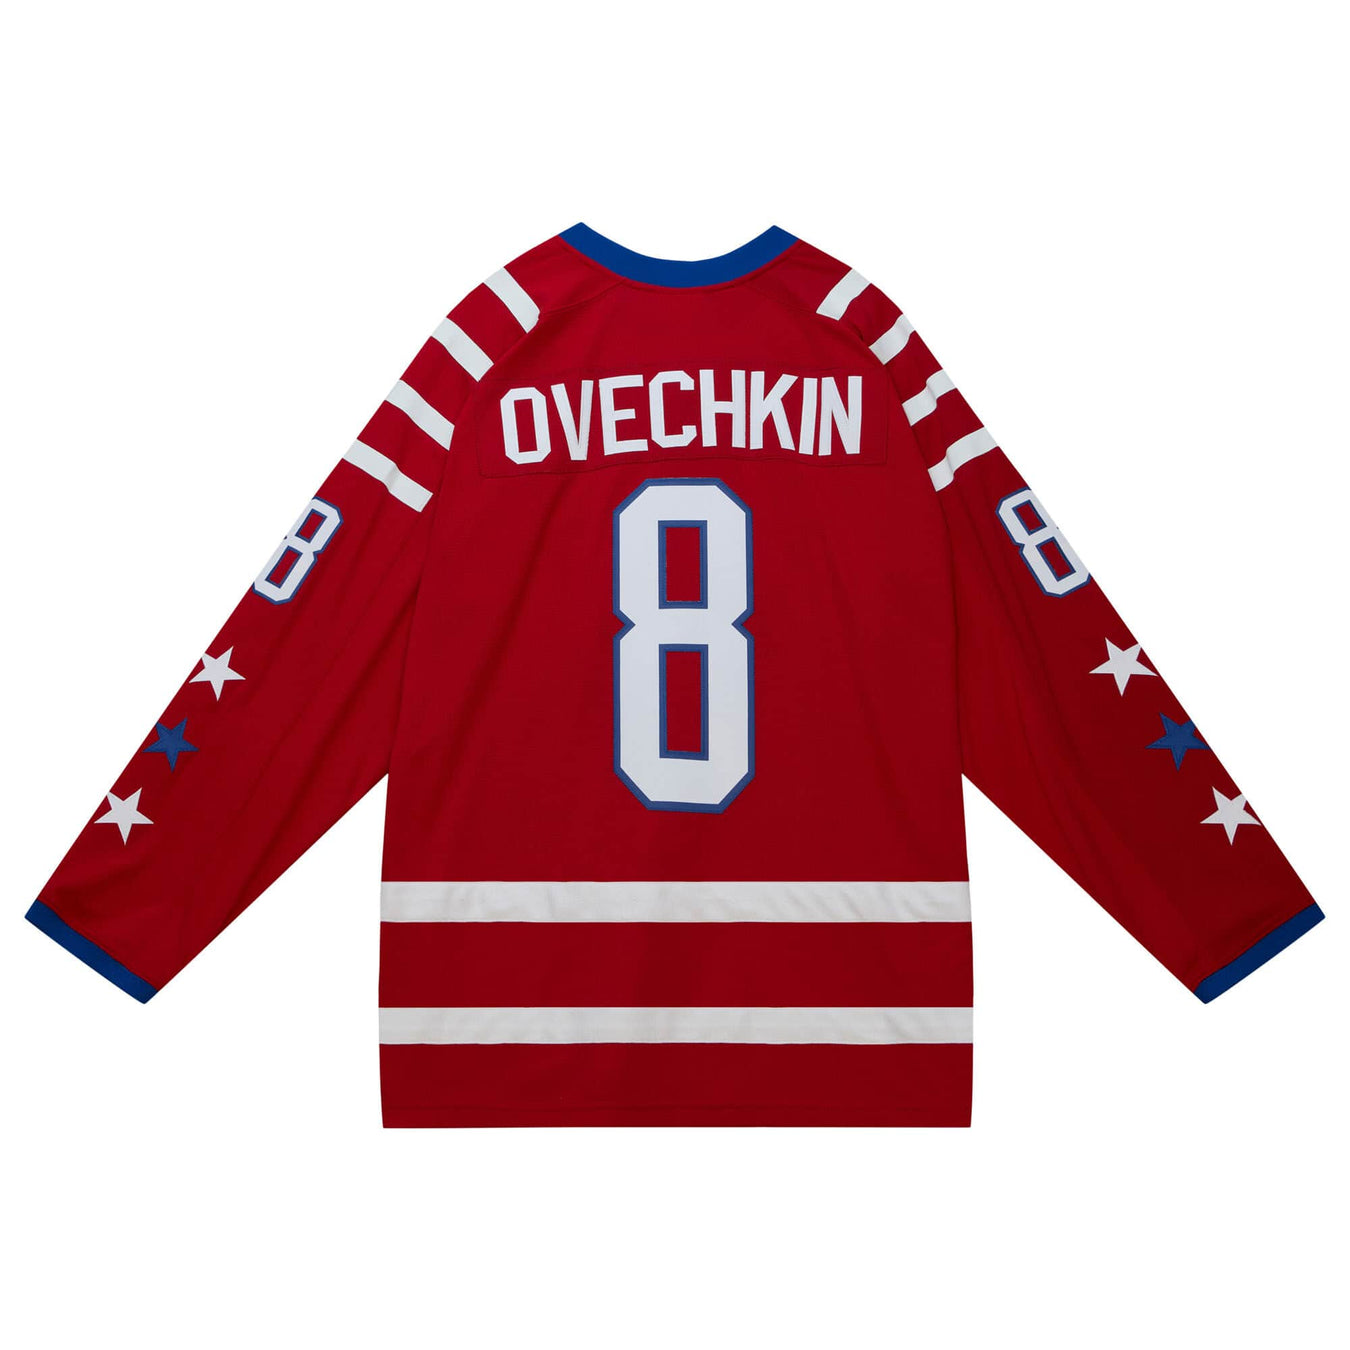 Alexander Ovechkin NHL Jerseys, Apparel and Collectibles